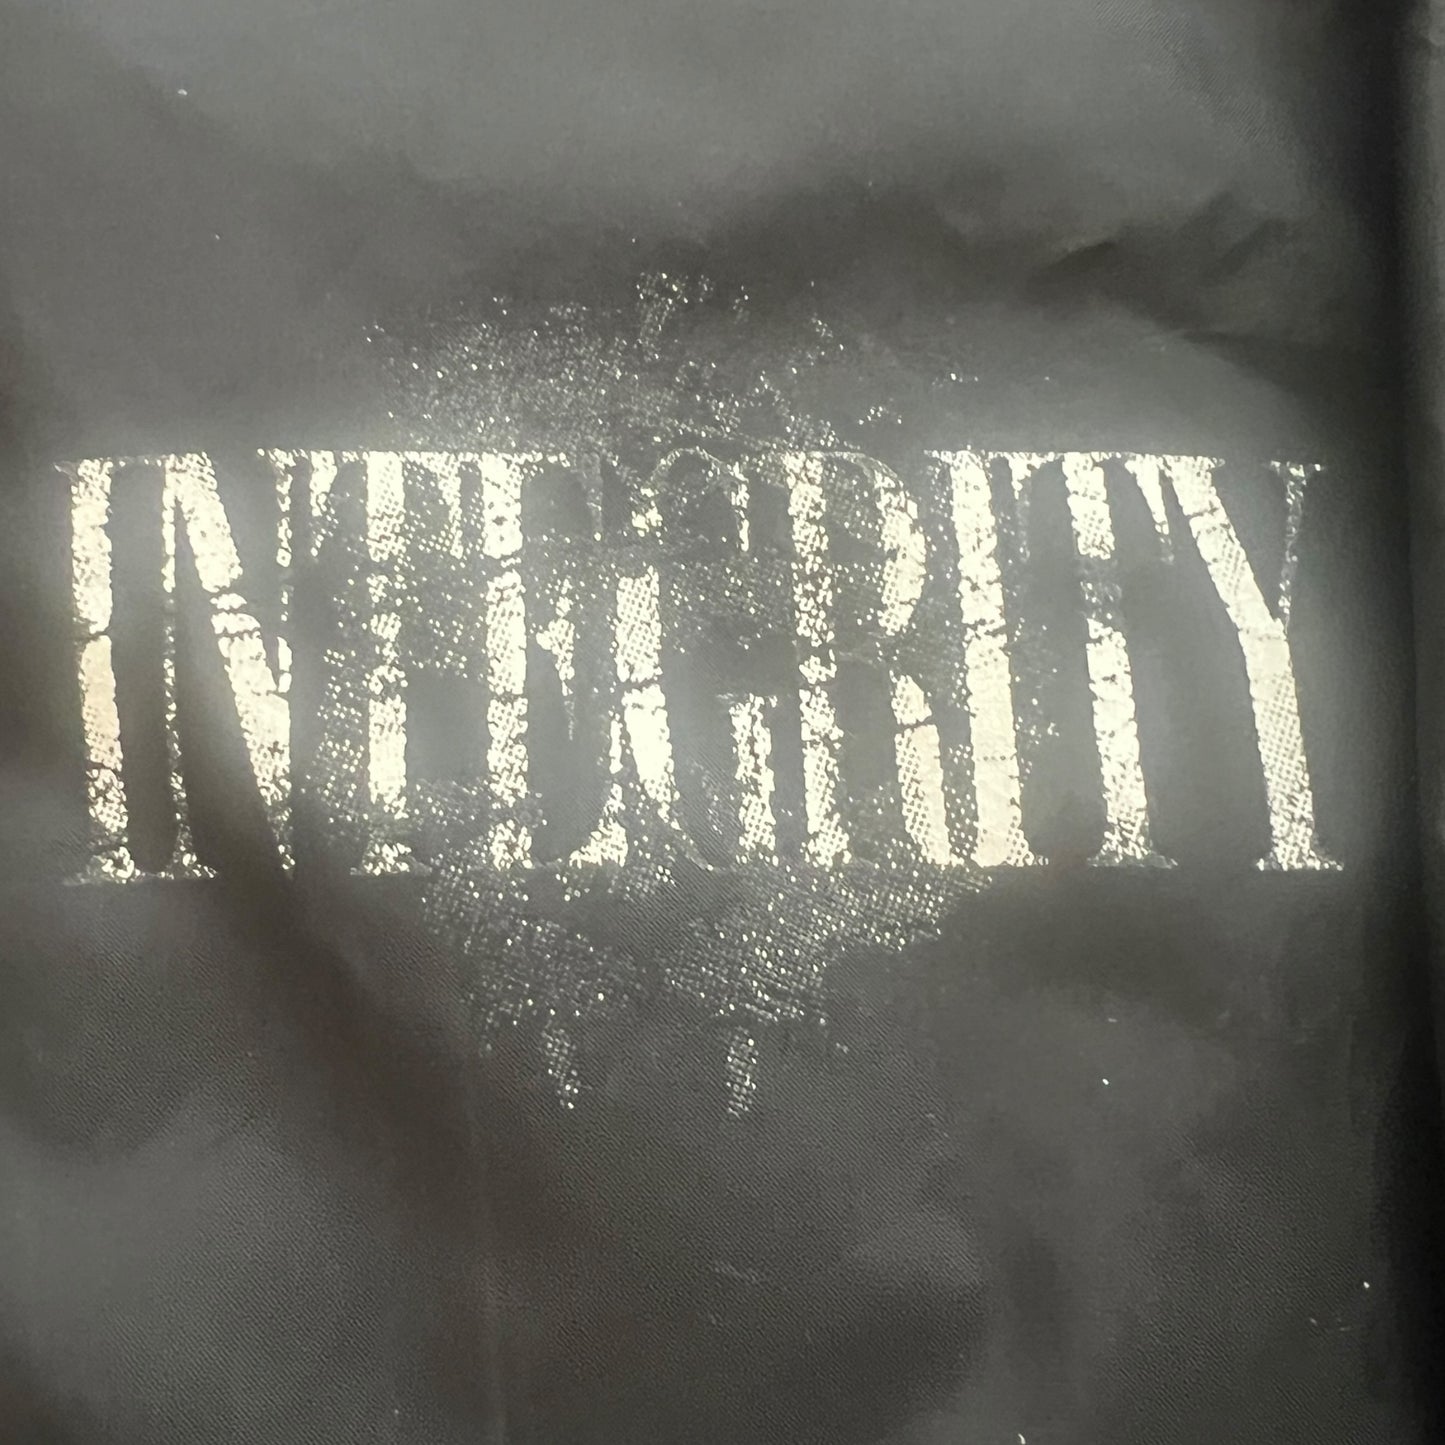 Integrity Band To Die For 2003 Vintage Windbreaker Size L